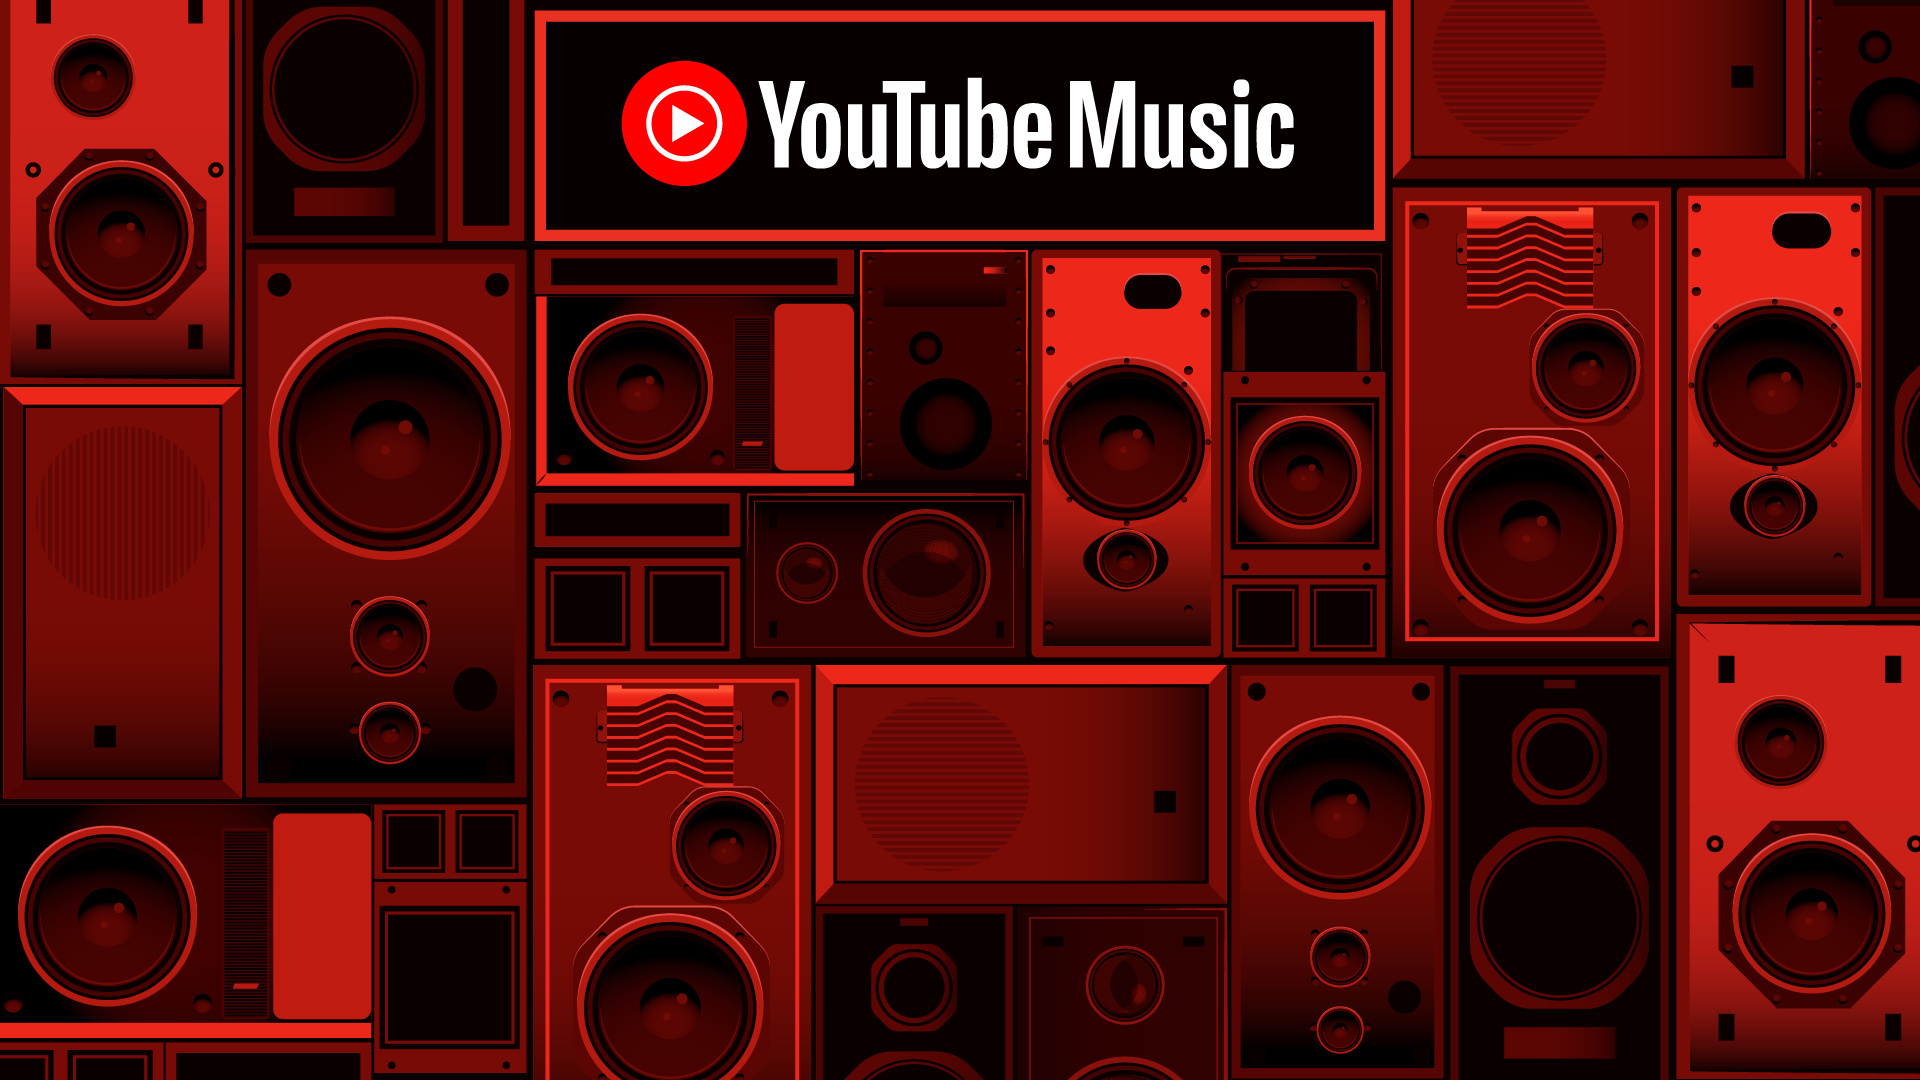 YouTube: A music streaming service, Songs and music videos, App. 1920x1080 Full HD Wallpaper.